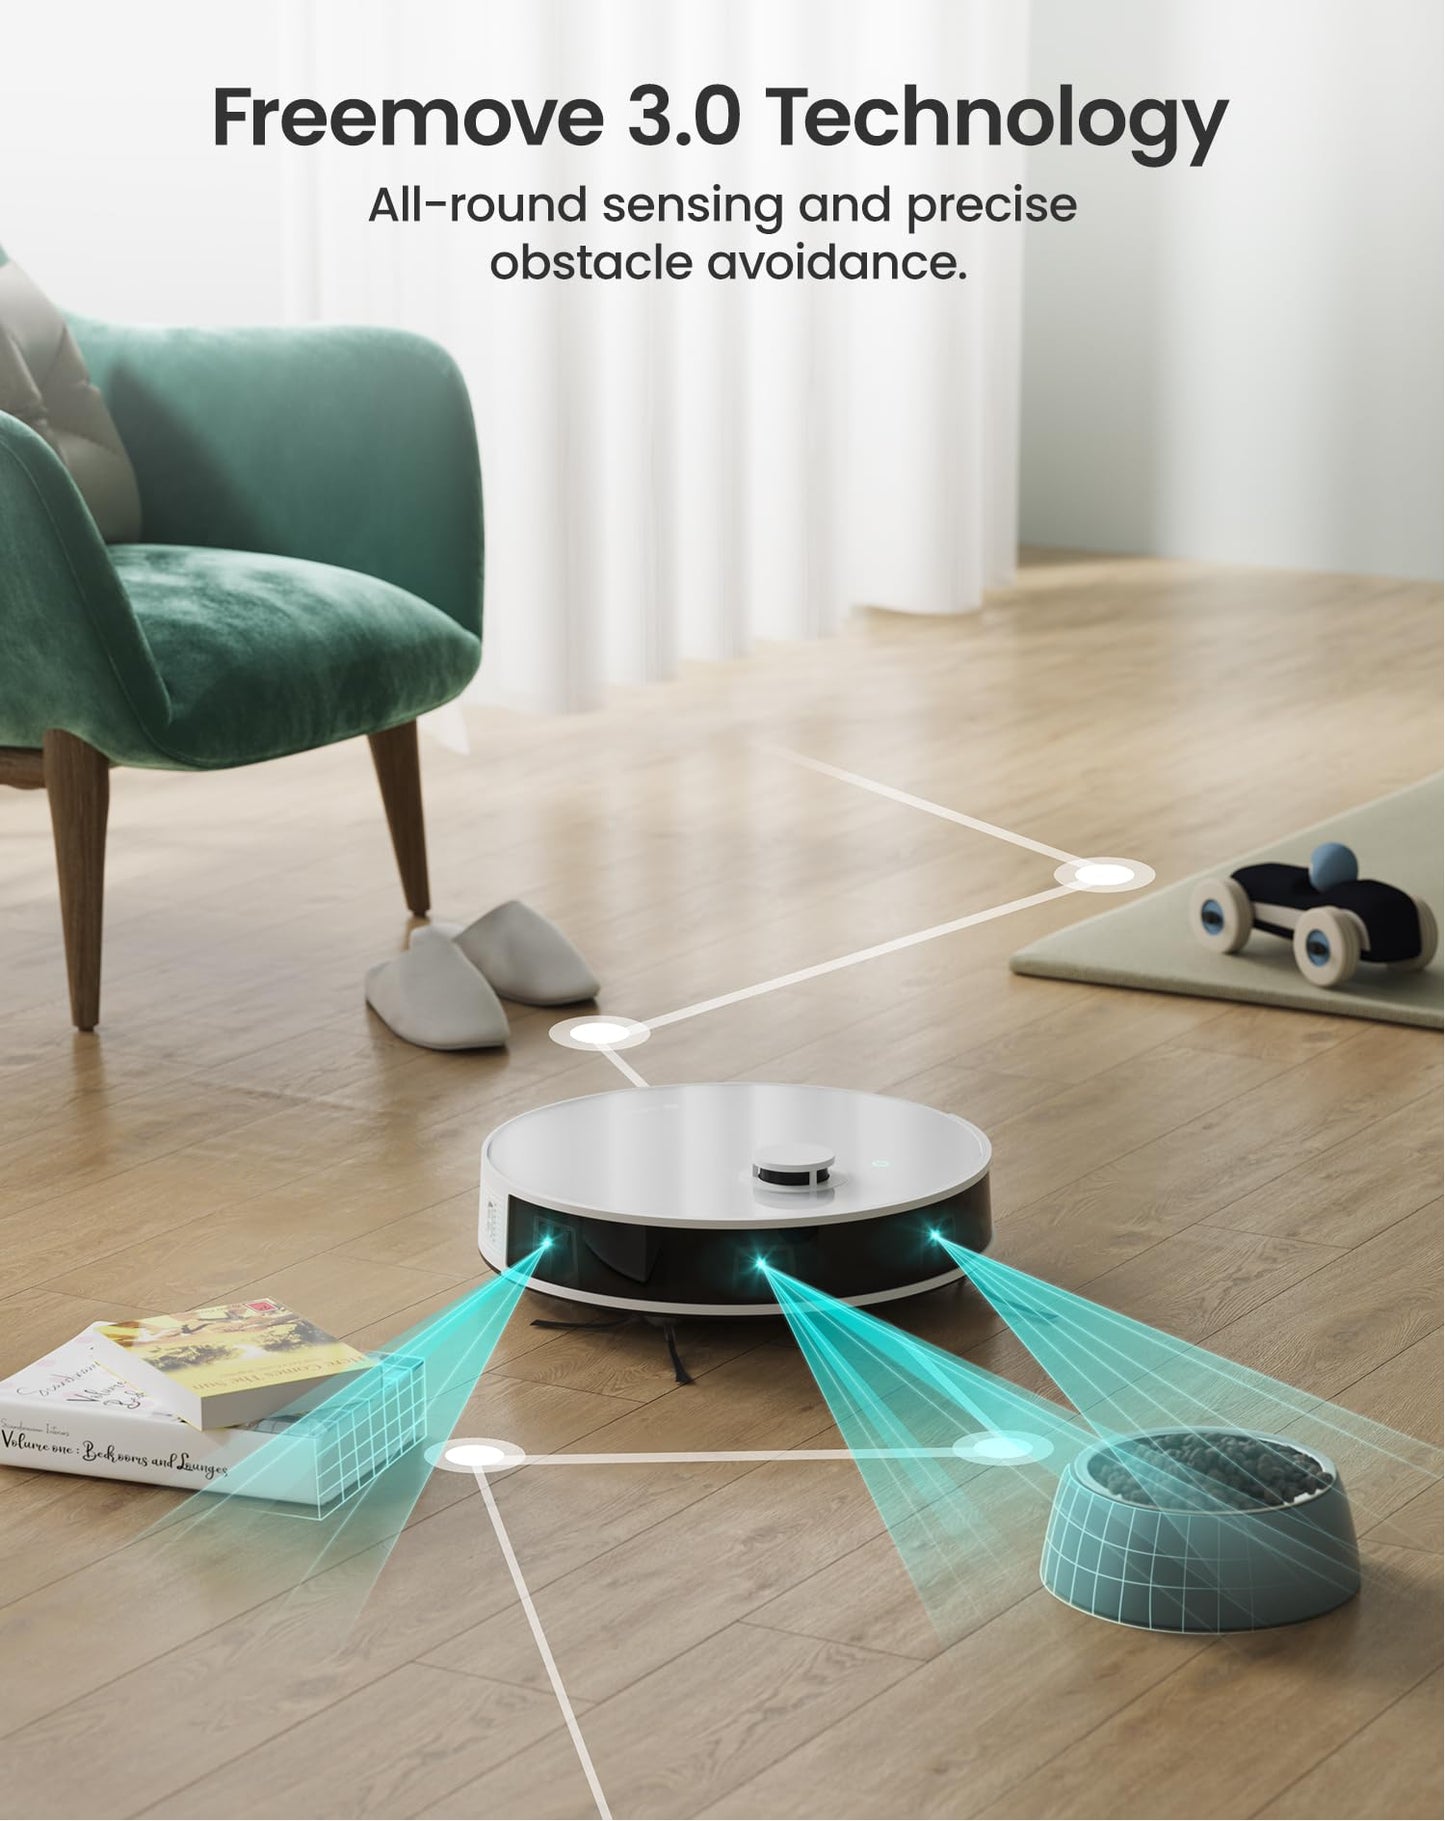 Lefant N3 Robot Vacuum and Mop Combo, Precision Mapping with Lidar & dToF Sensors, Max 4000Pa Suction, Ultrasonic Carpet Detection, Robotic Vacuum Cleaner with Sonic Mopping, WiFi/App/Alexa Control